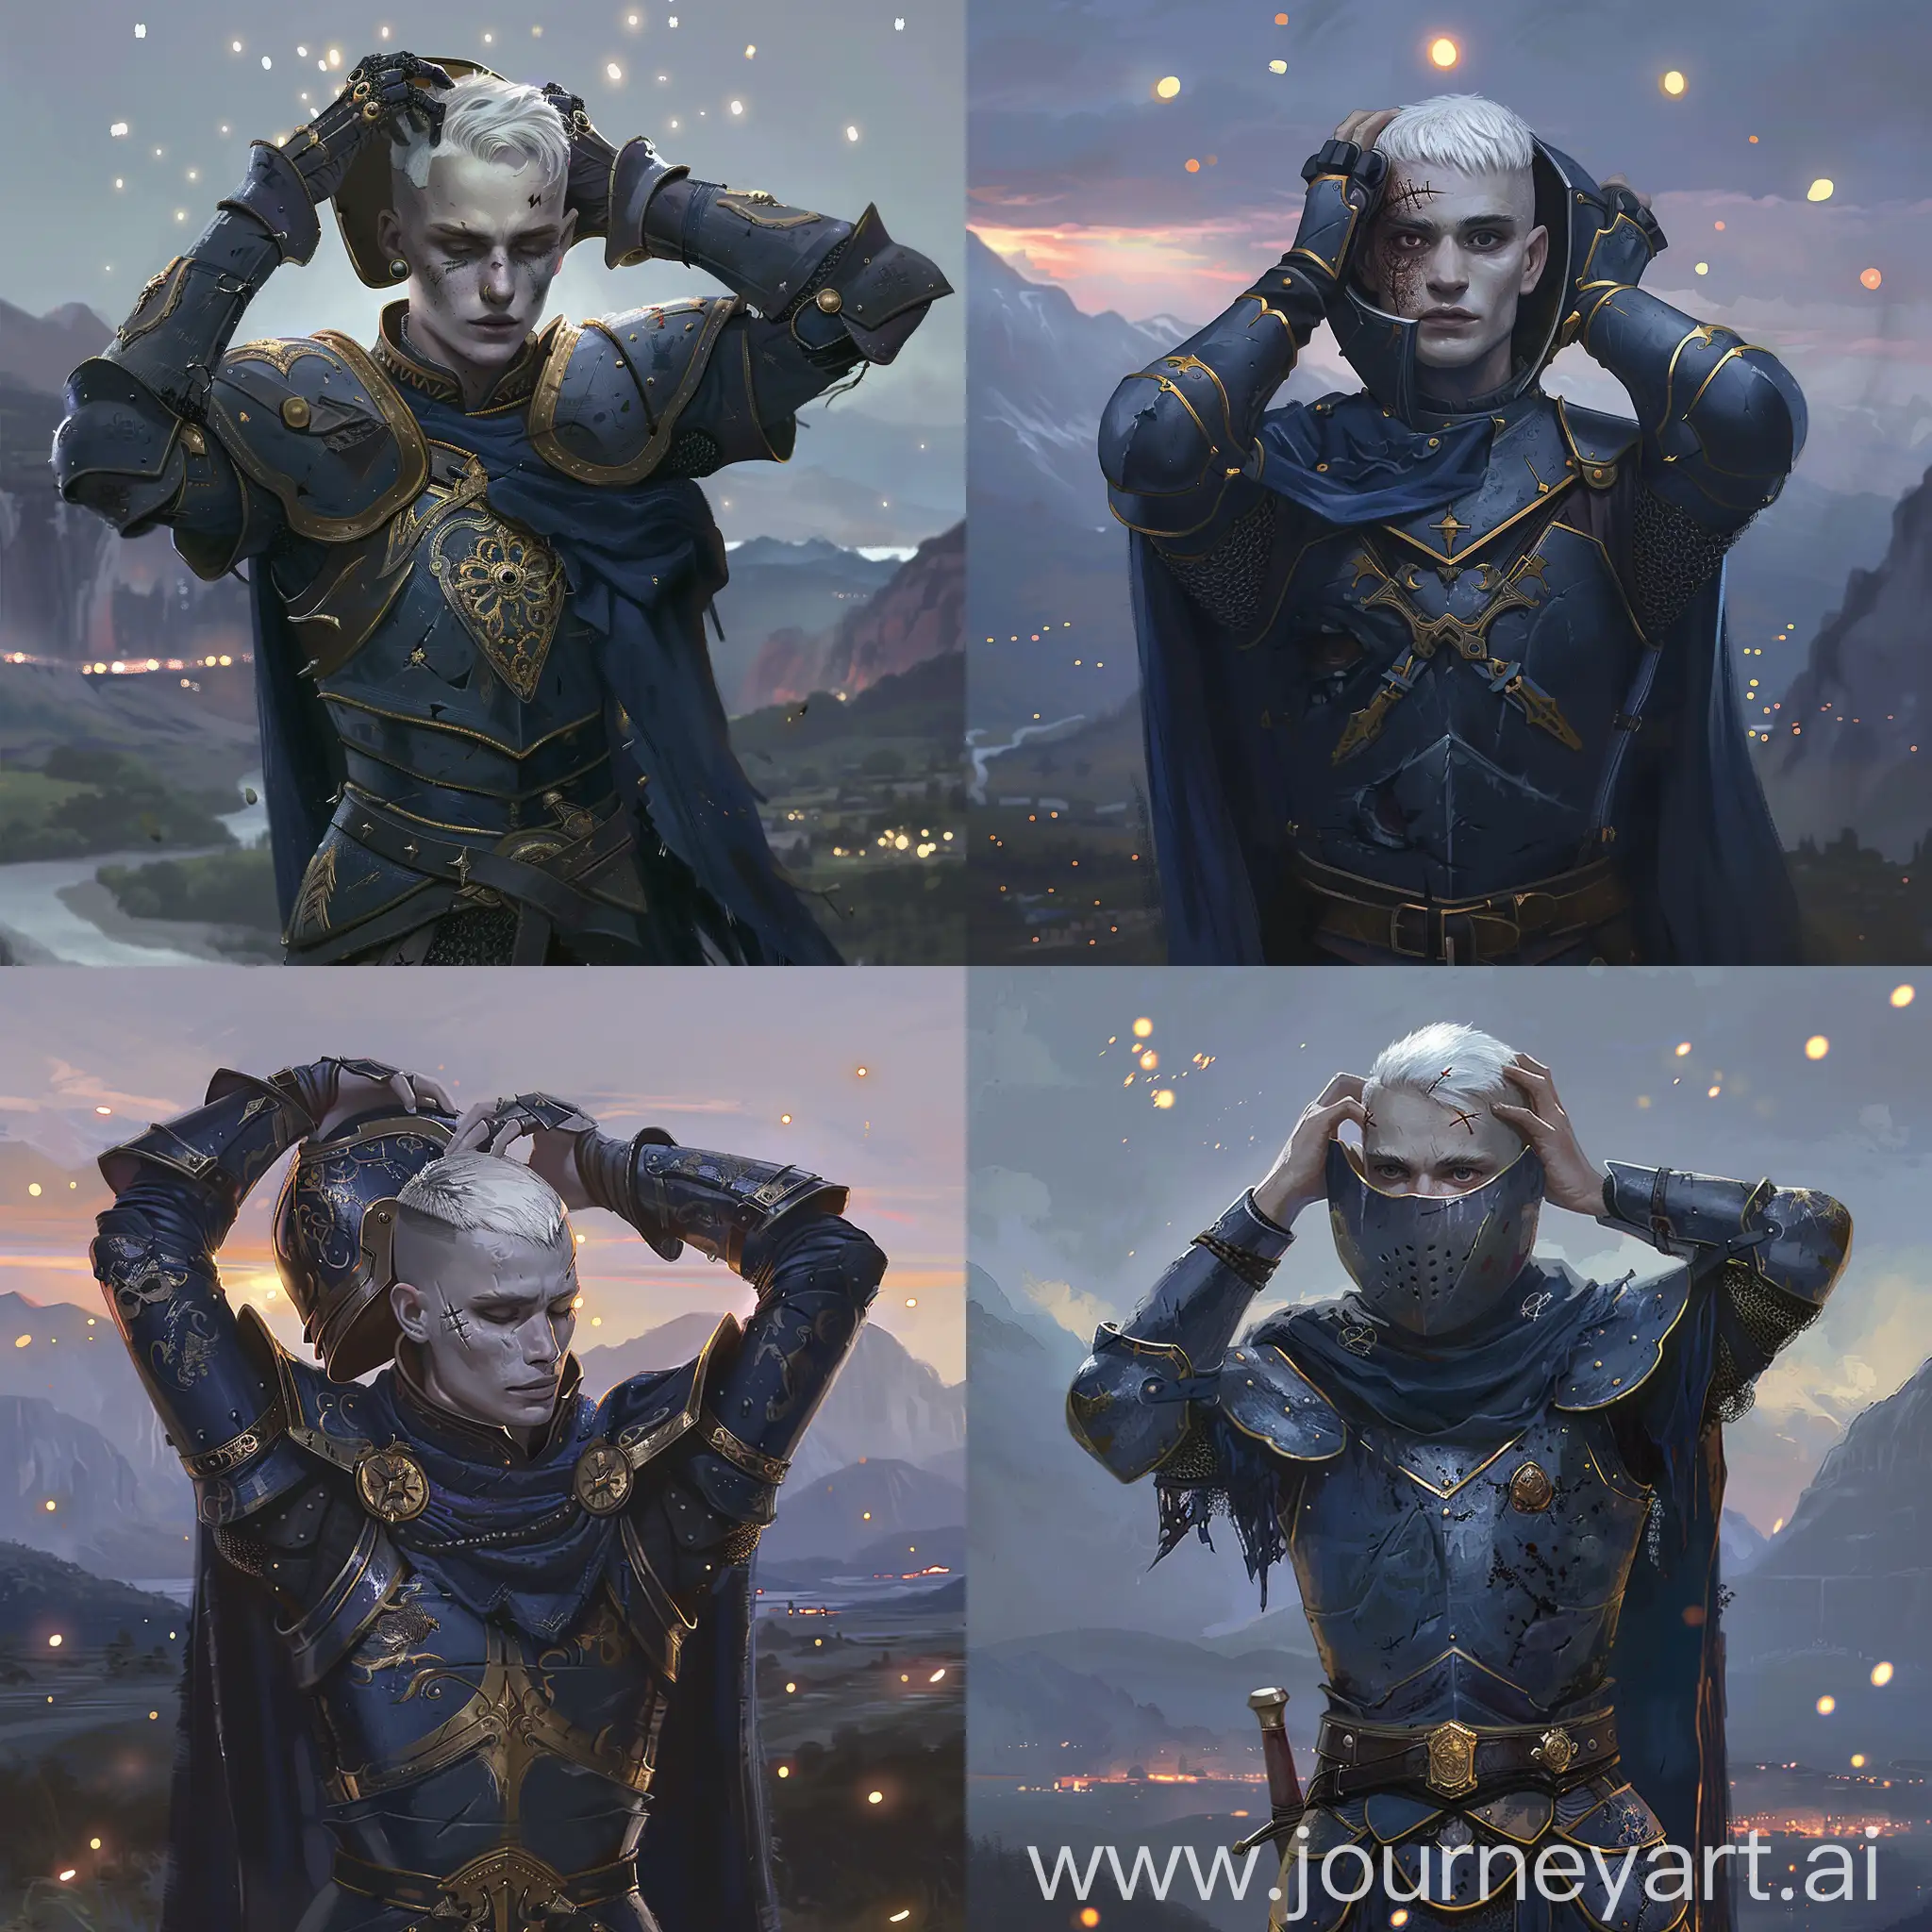 He is male human paladin, with short white hair bowl haircut, tall, wearing knight's armor with a dark blue cloak with gold trim, he raised his hands to his head holding the helmet to his face, he has pale skin and scars on his face.. In the background there is a mountain landscape at dusk, little lights in the air